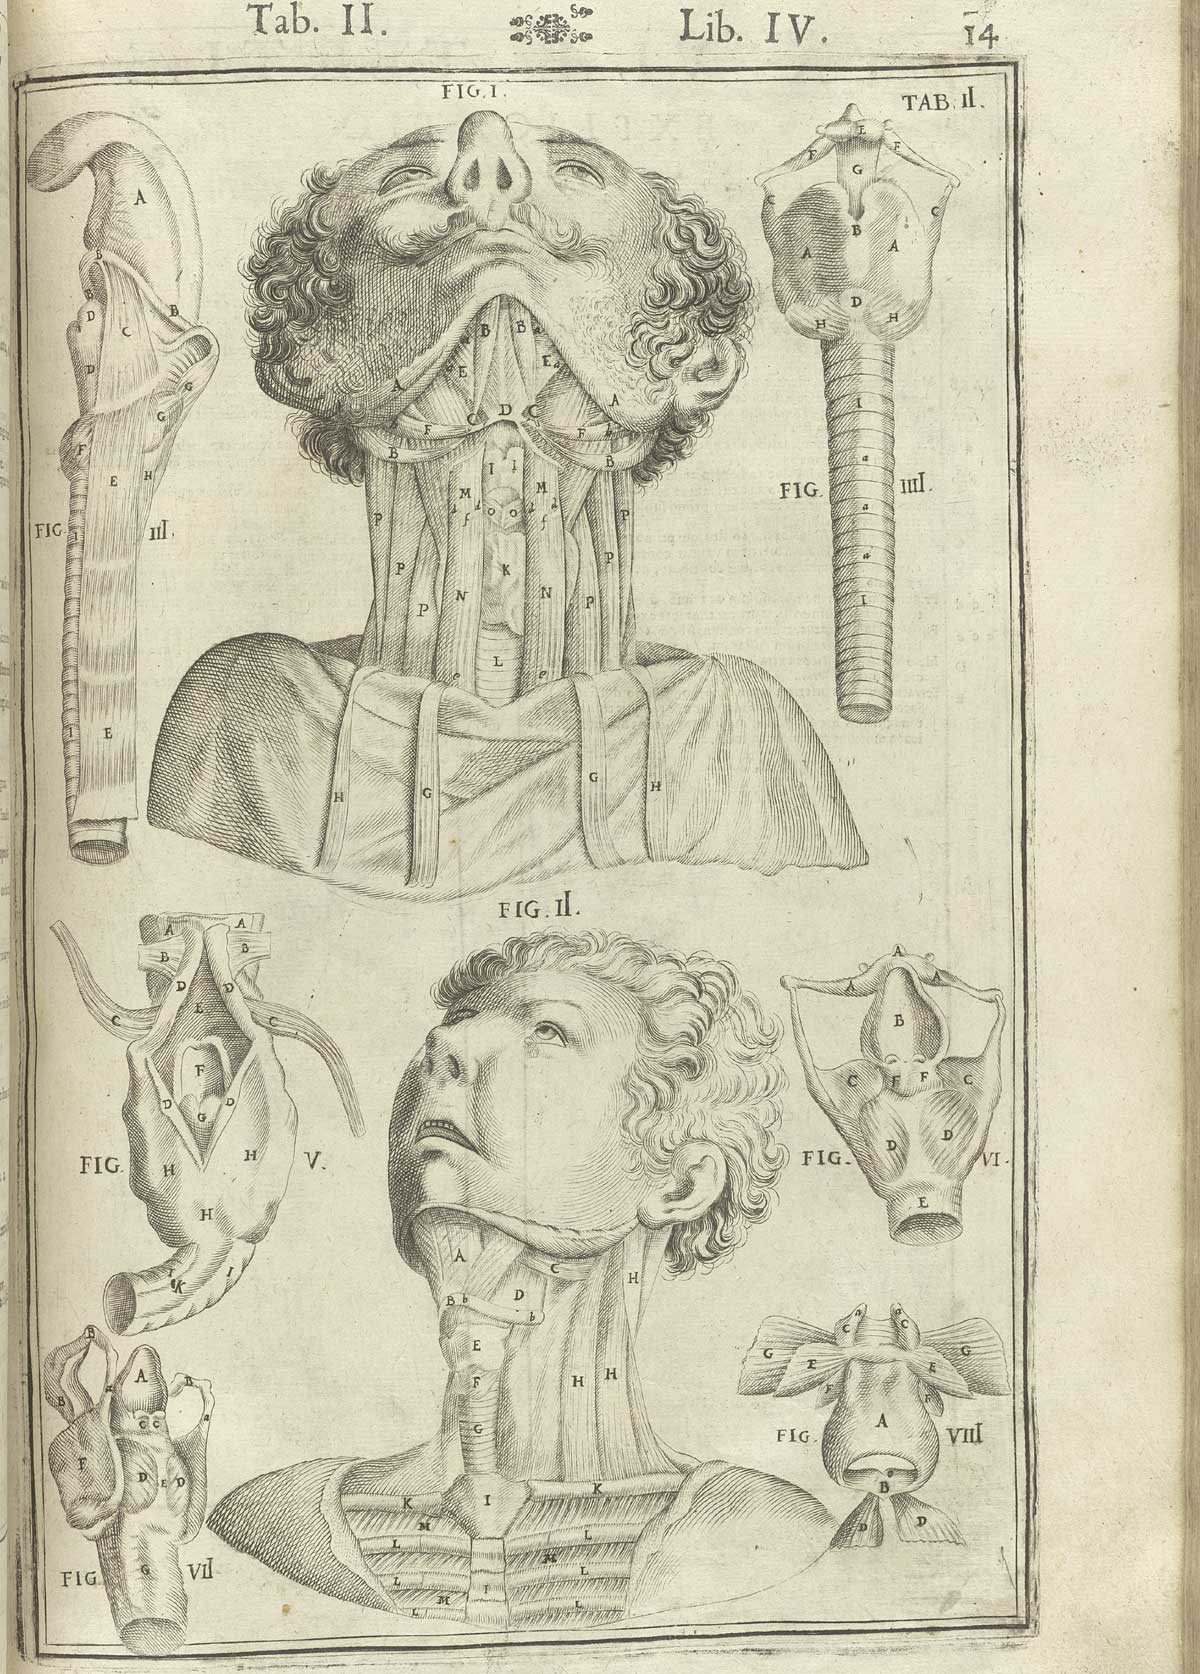 Engraving of two men with the inner structures of their necks exposed, one above the other, with separate details on the sides of the trachea from several different angles, from Adriaan van de Spiegel and Giulio Cassieri’s De humani corporis fabrica libri decem, Venice, 1627, NLM call no. WZ 250 S755dh 1627.